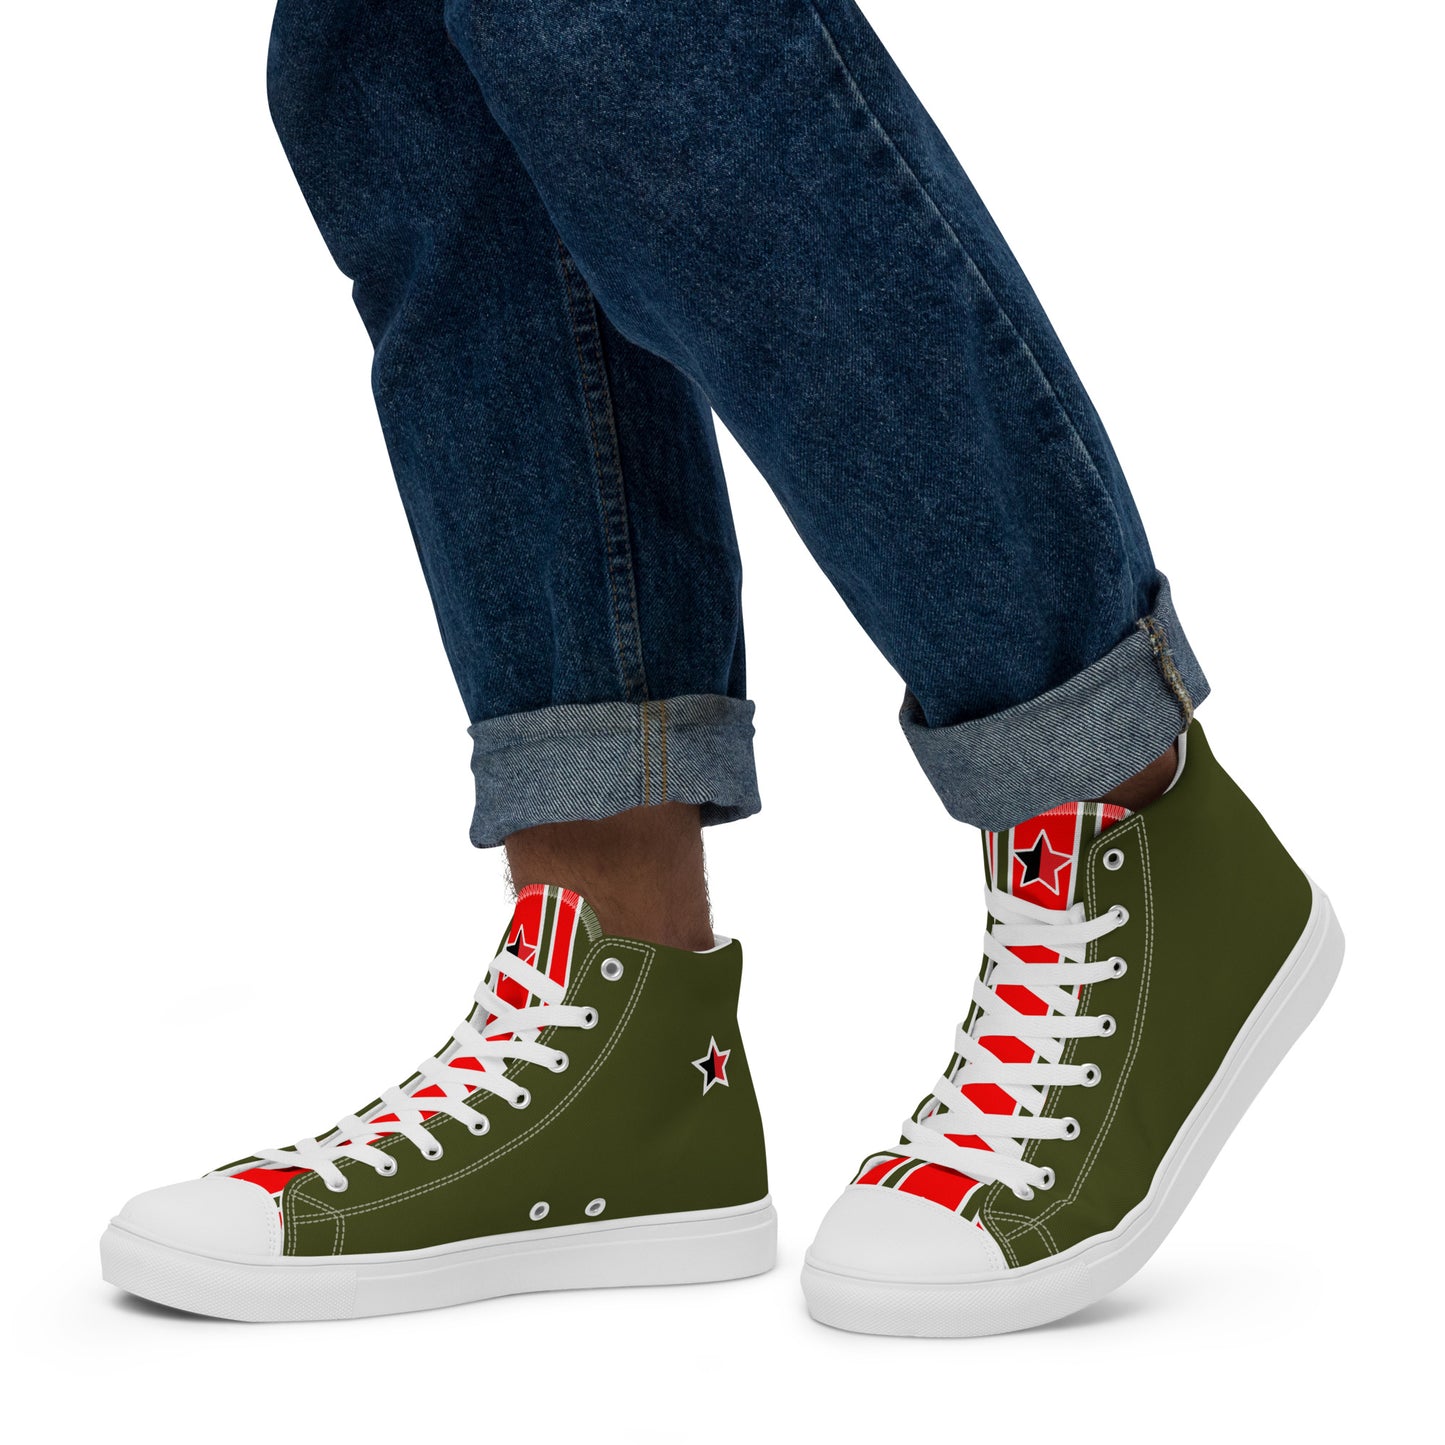 FRENCH 75 | Men’s High Top Canvas Shoes | LIMITED EDITION